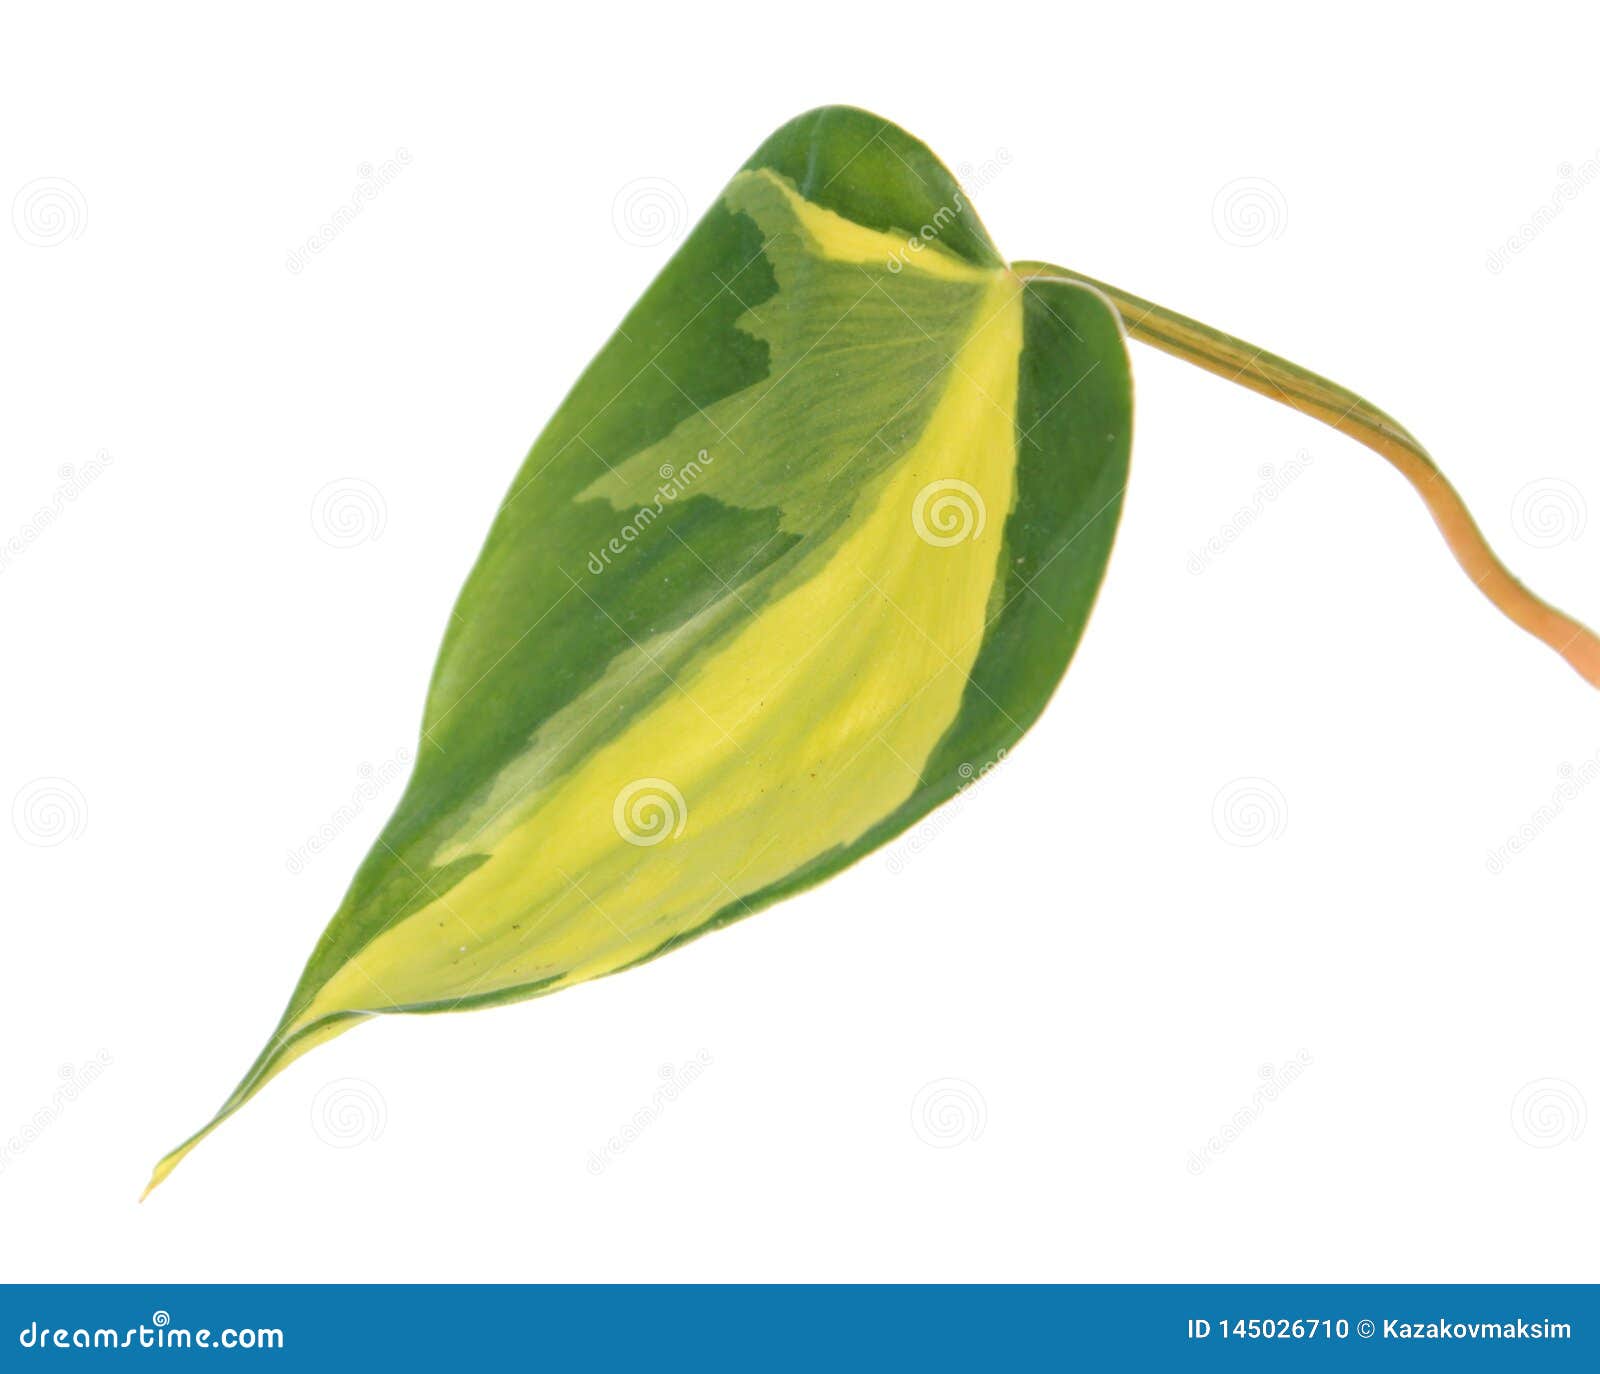 variegated green leaf of philodendron hederaceum var. oxycardium syn. philodendron scandens subsp. oxycardium